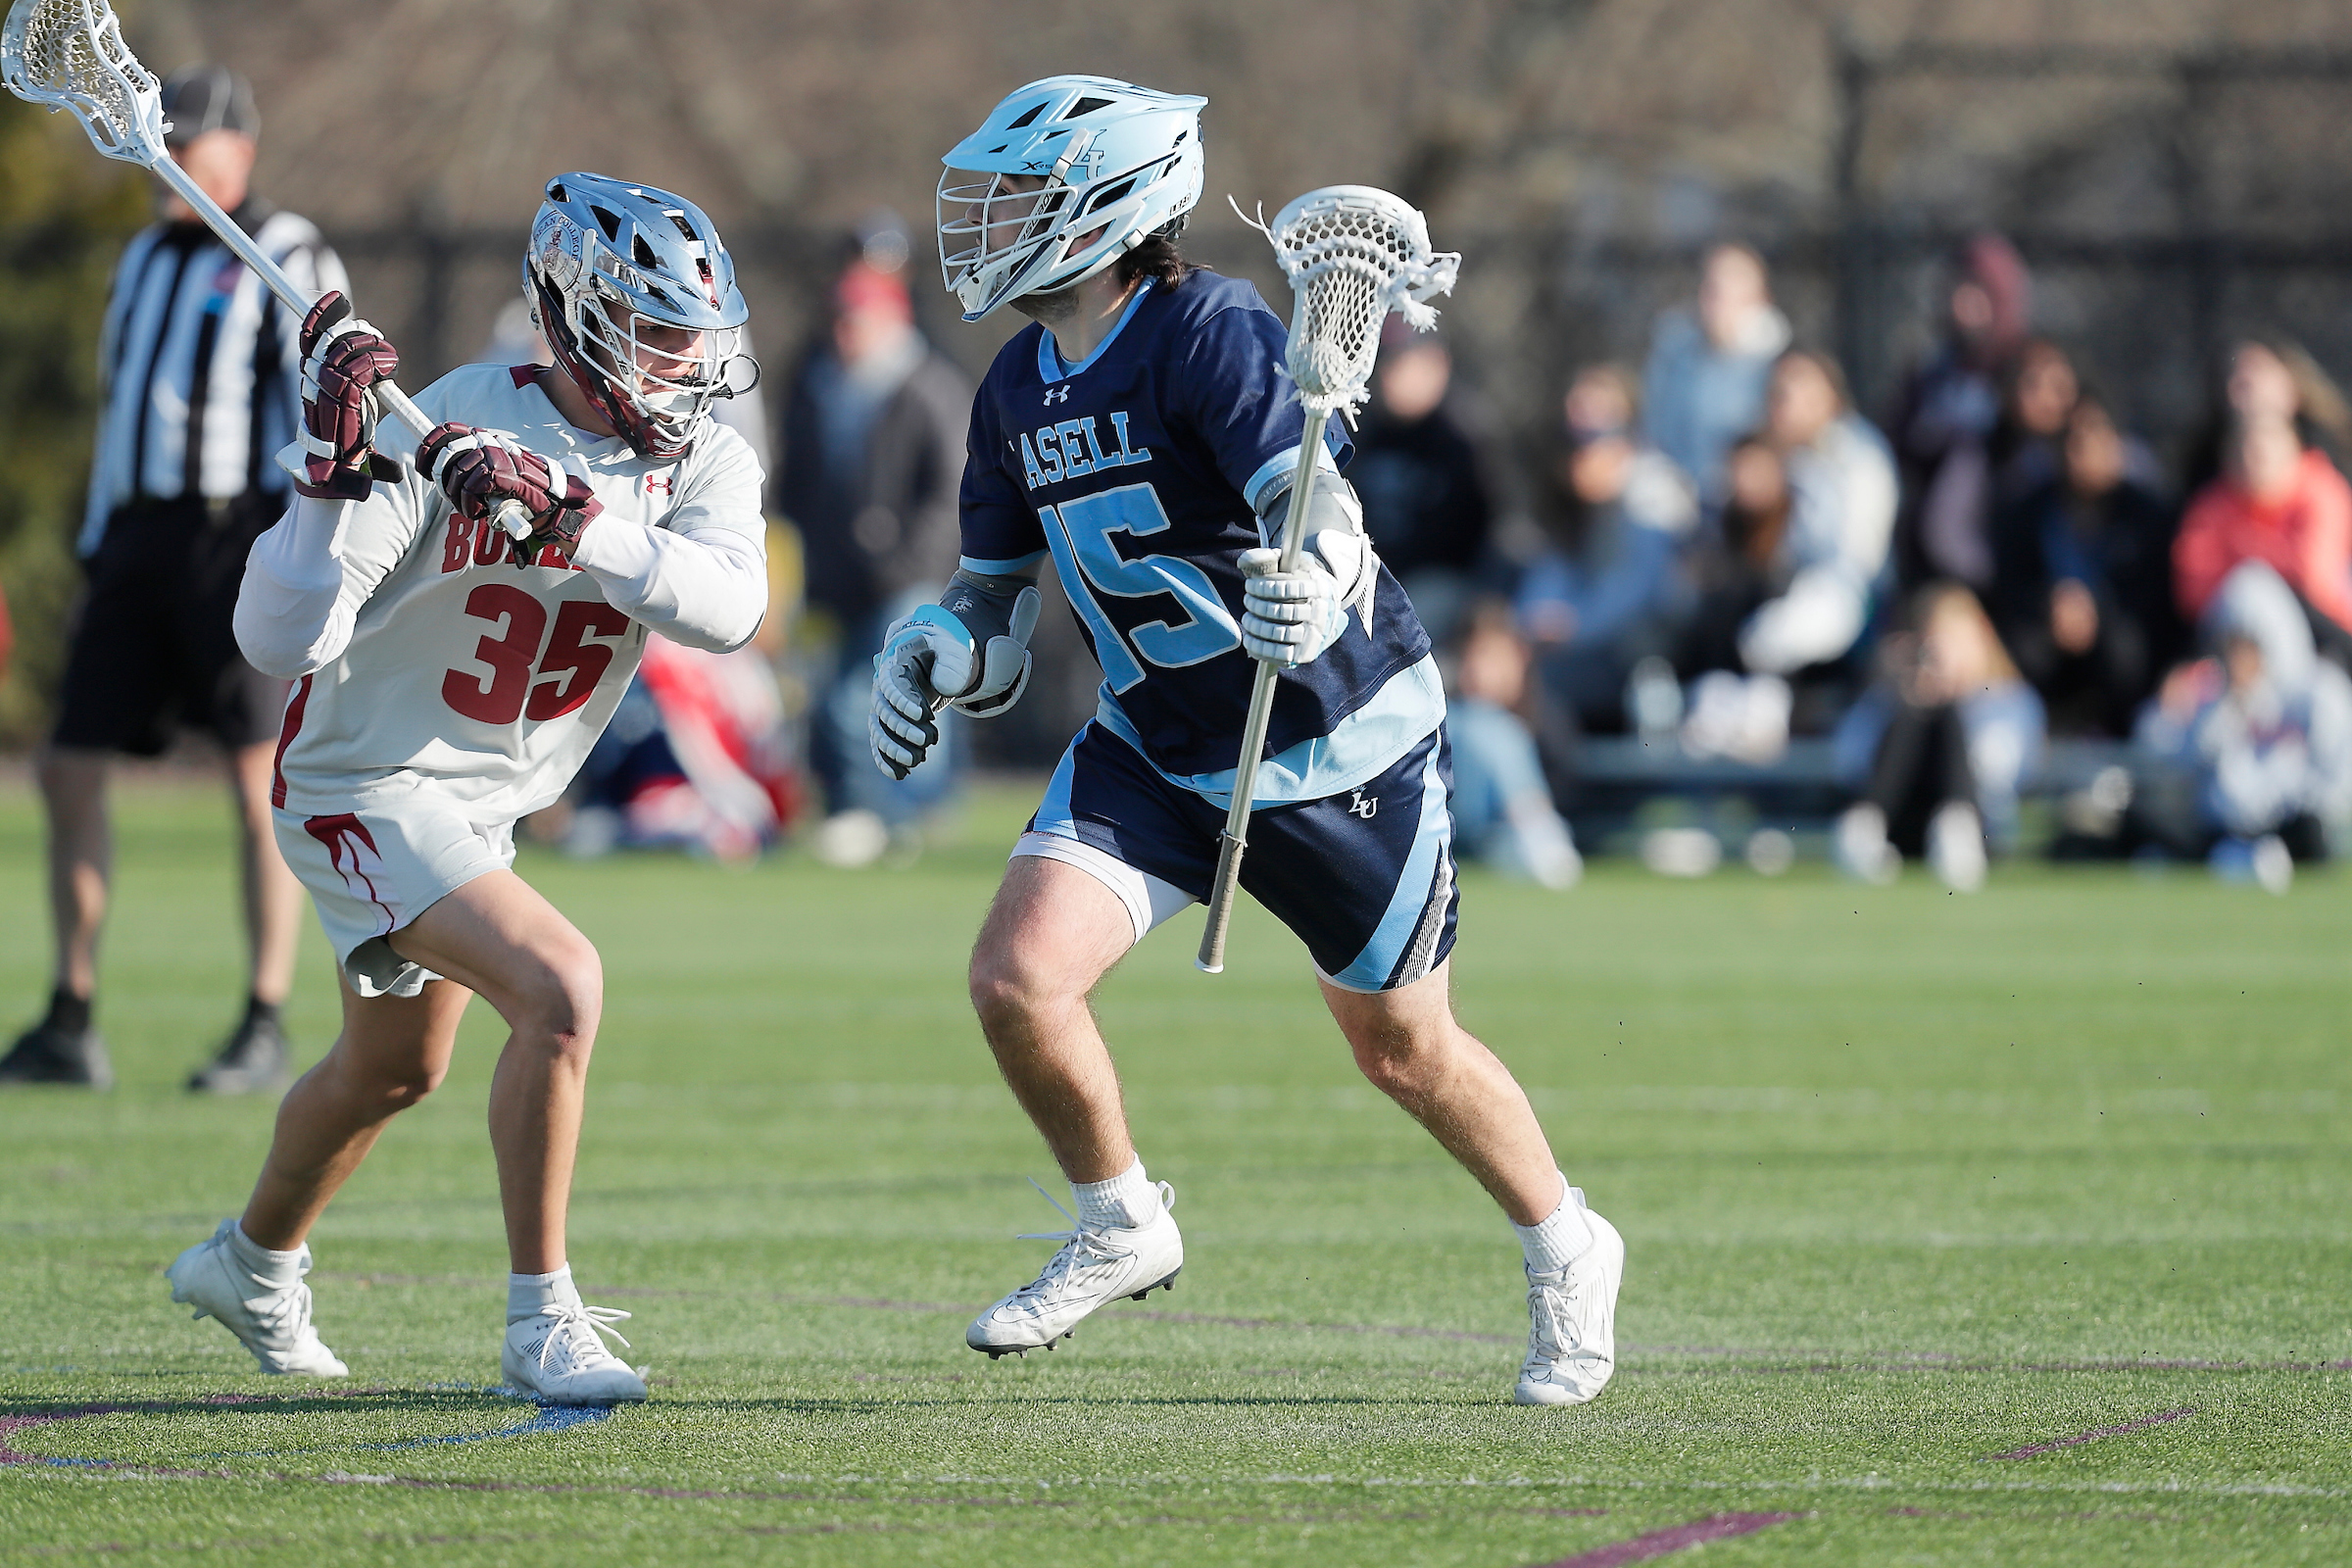 MLax: Lasers Tripped Up by Monks